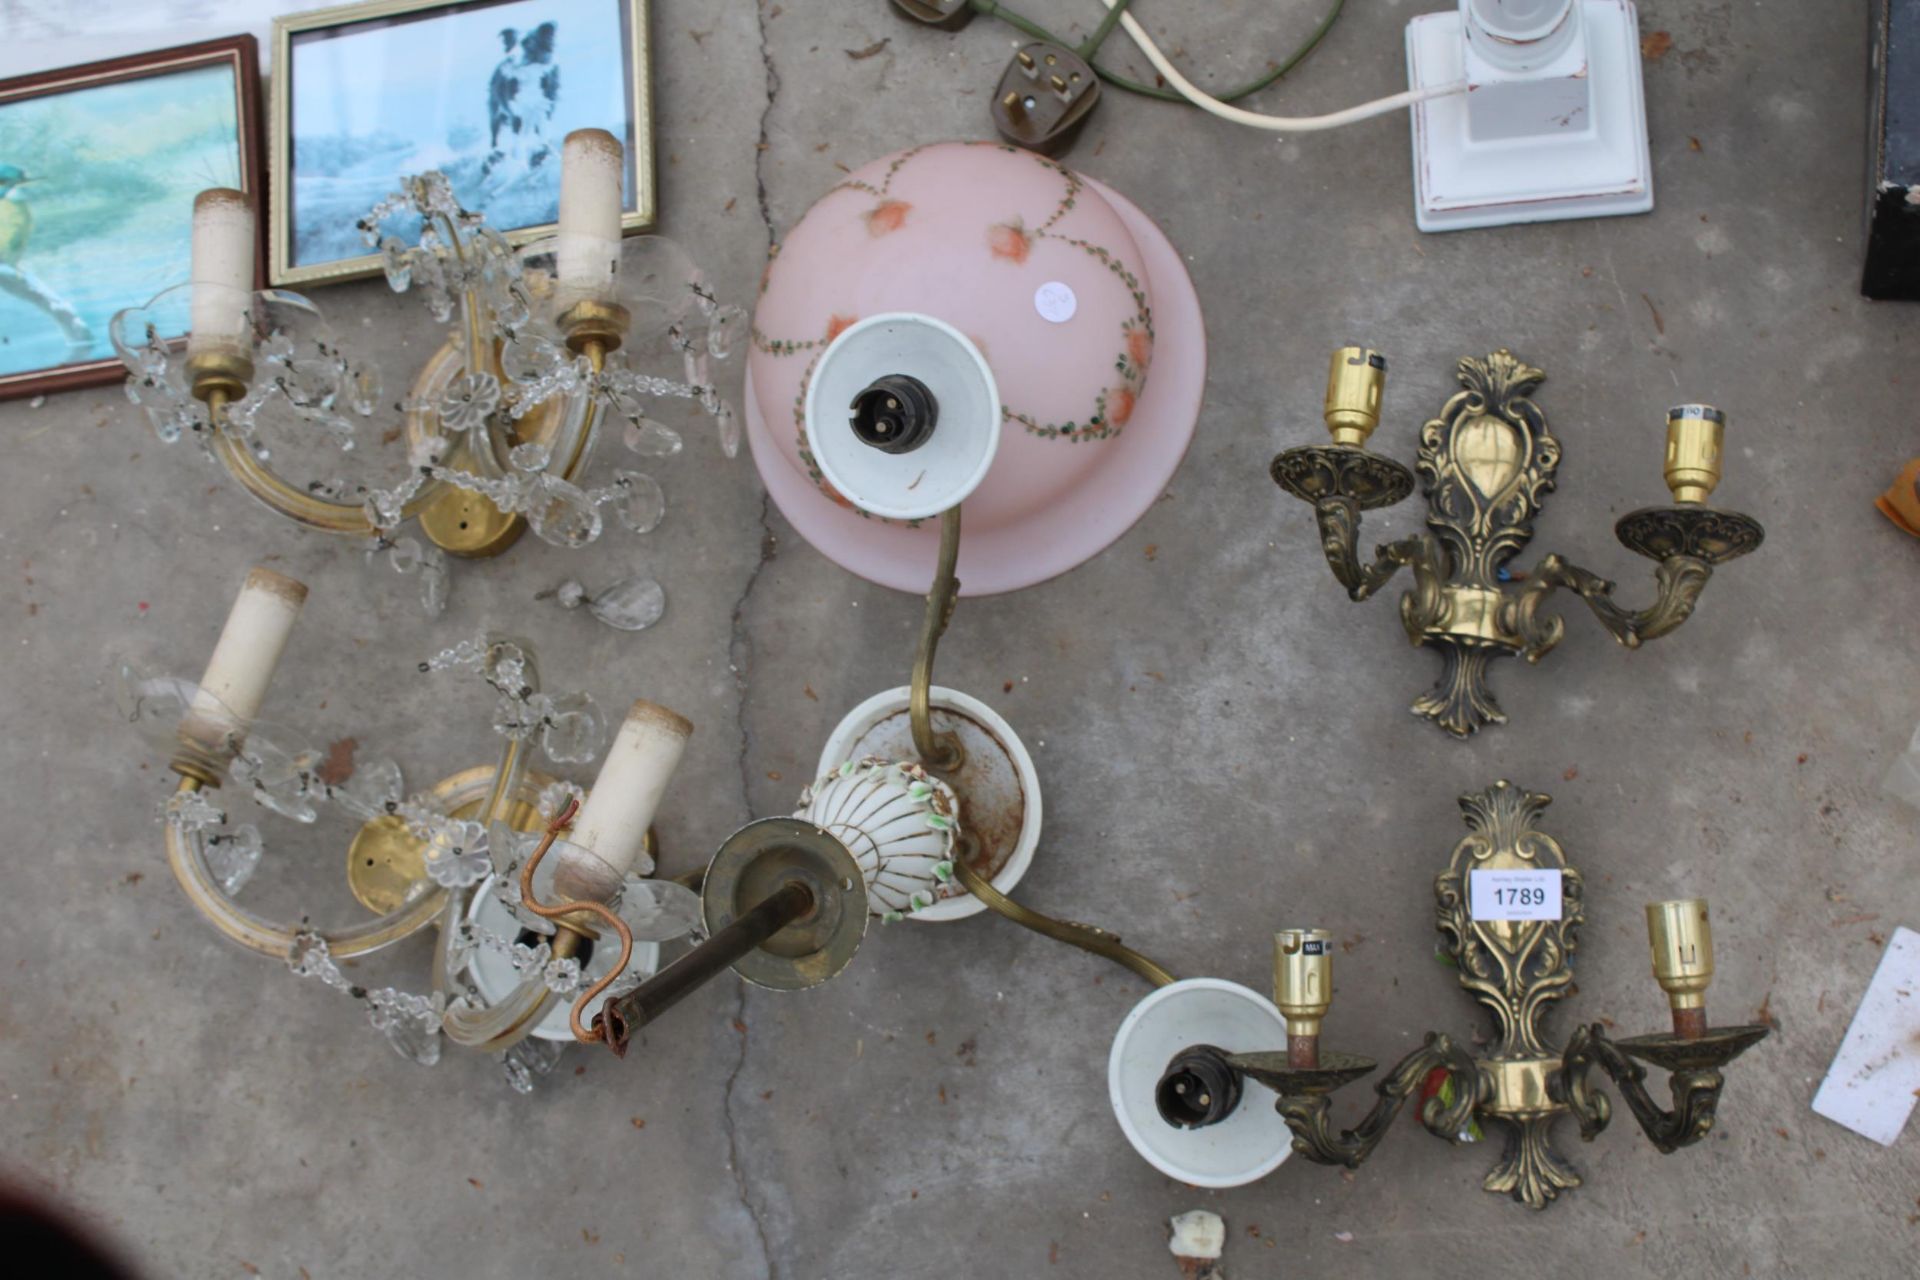 AN ASSORTMENT OF VARIOUS LAMPS AND LIGHT FITTINGS ETC - Image 2 of 3